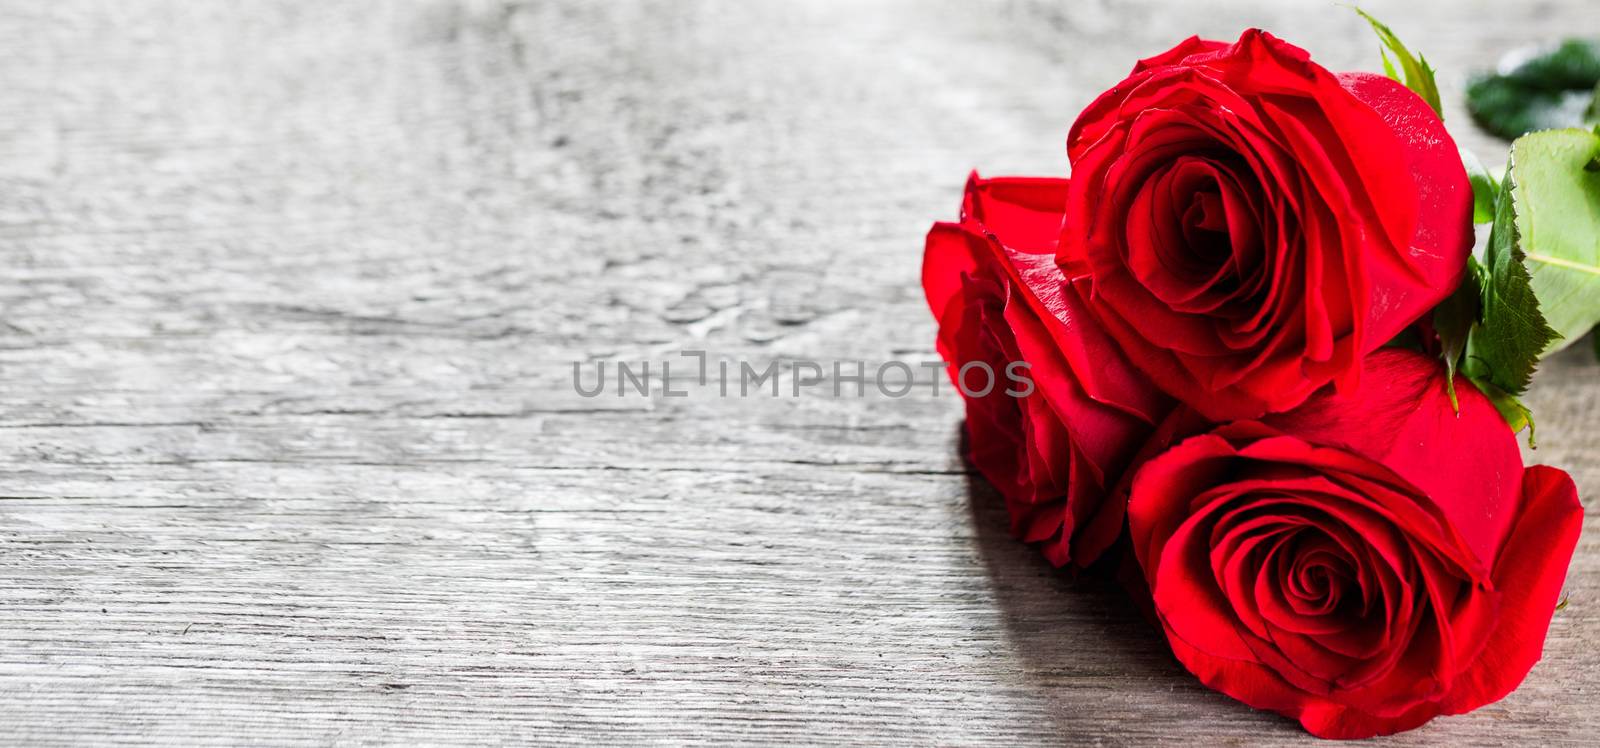 Red roses on wood by Yellowj